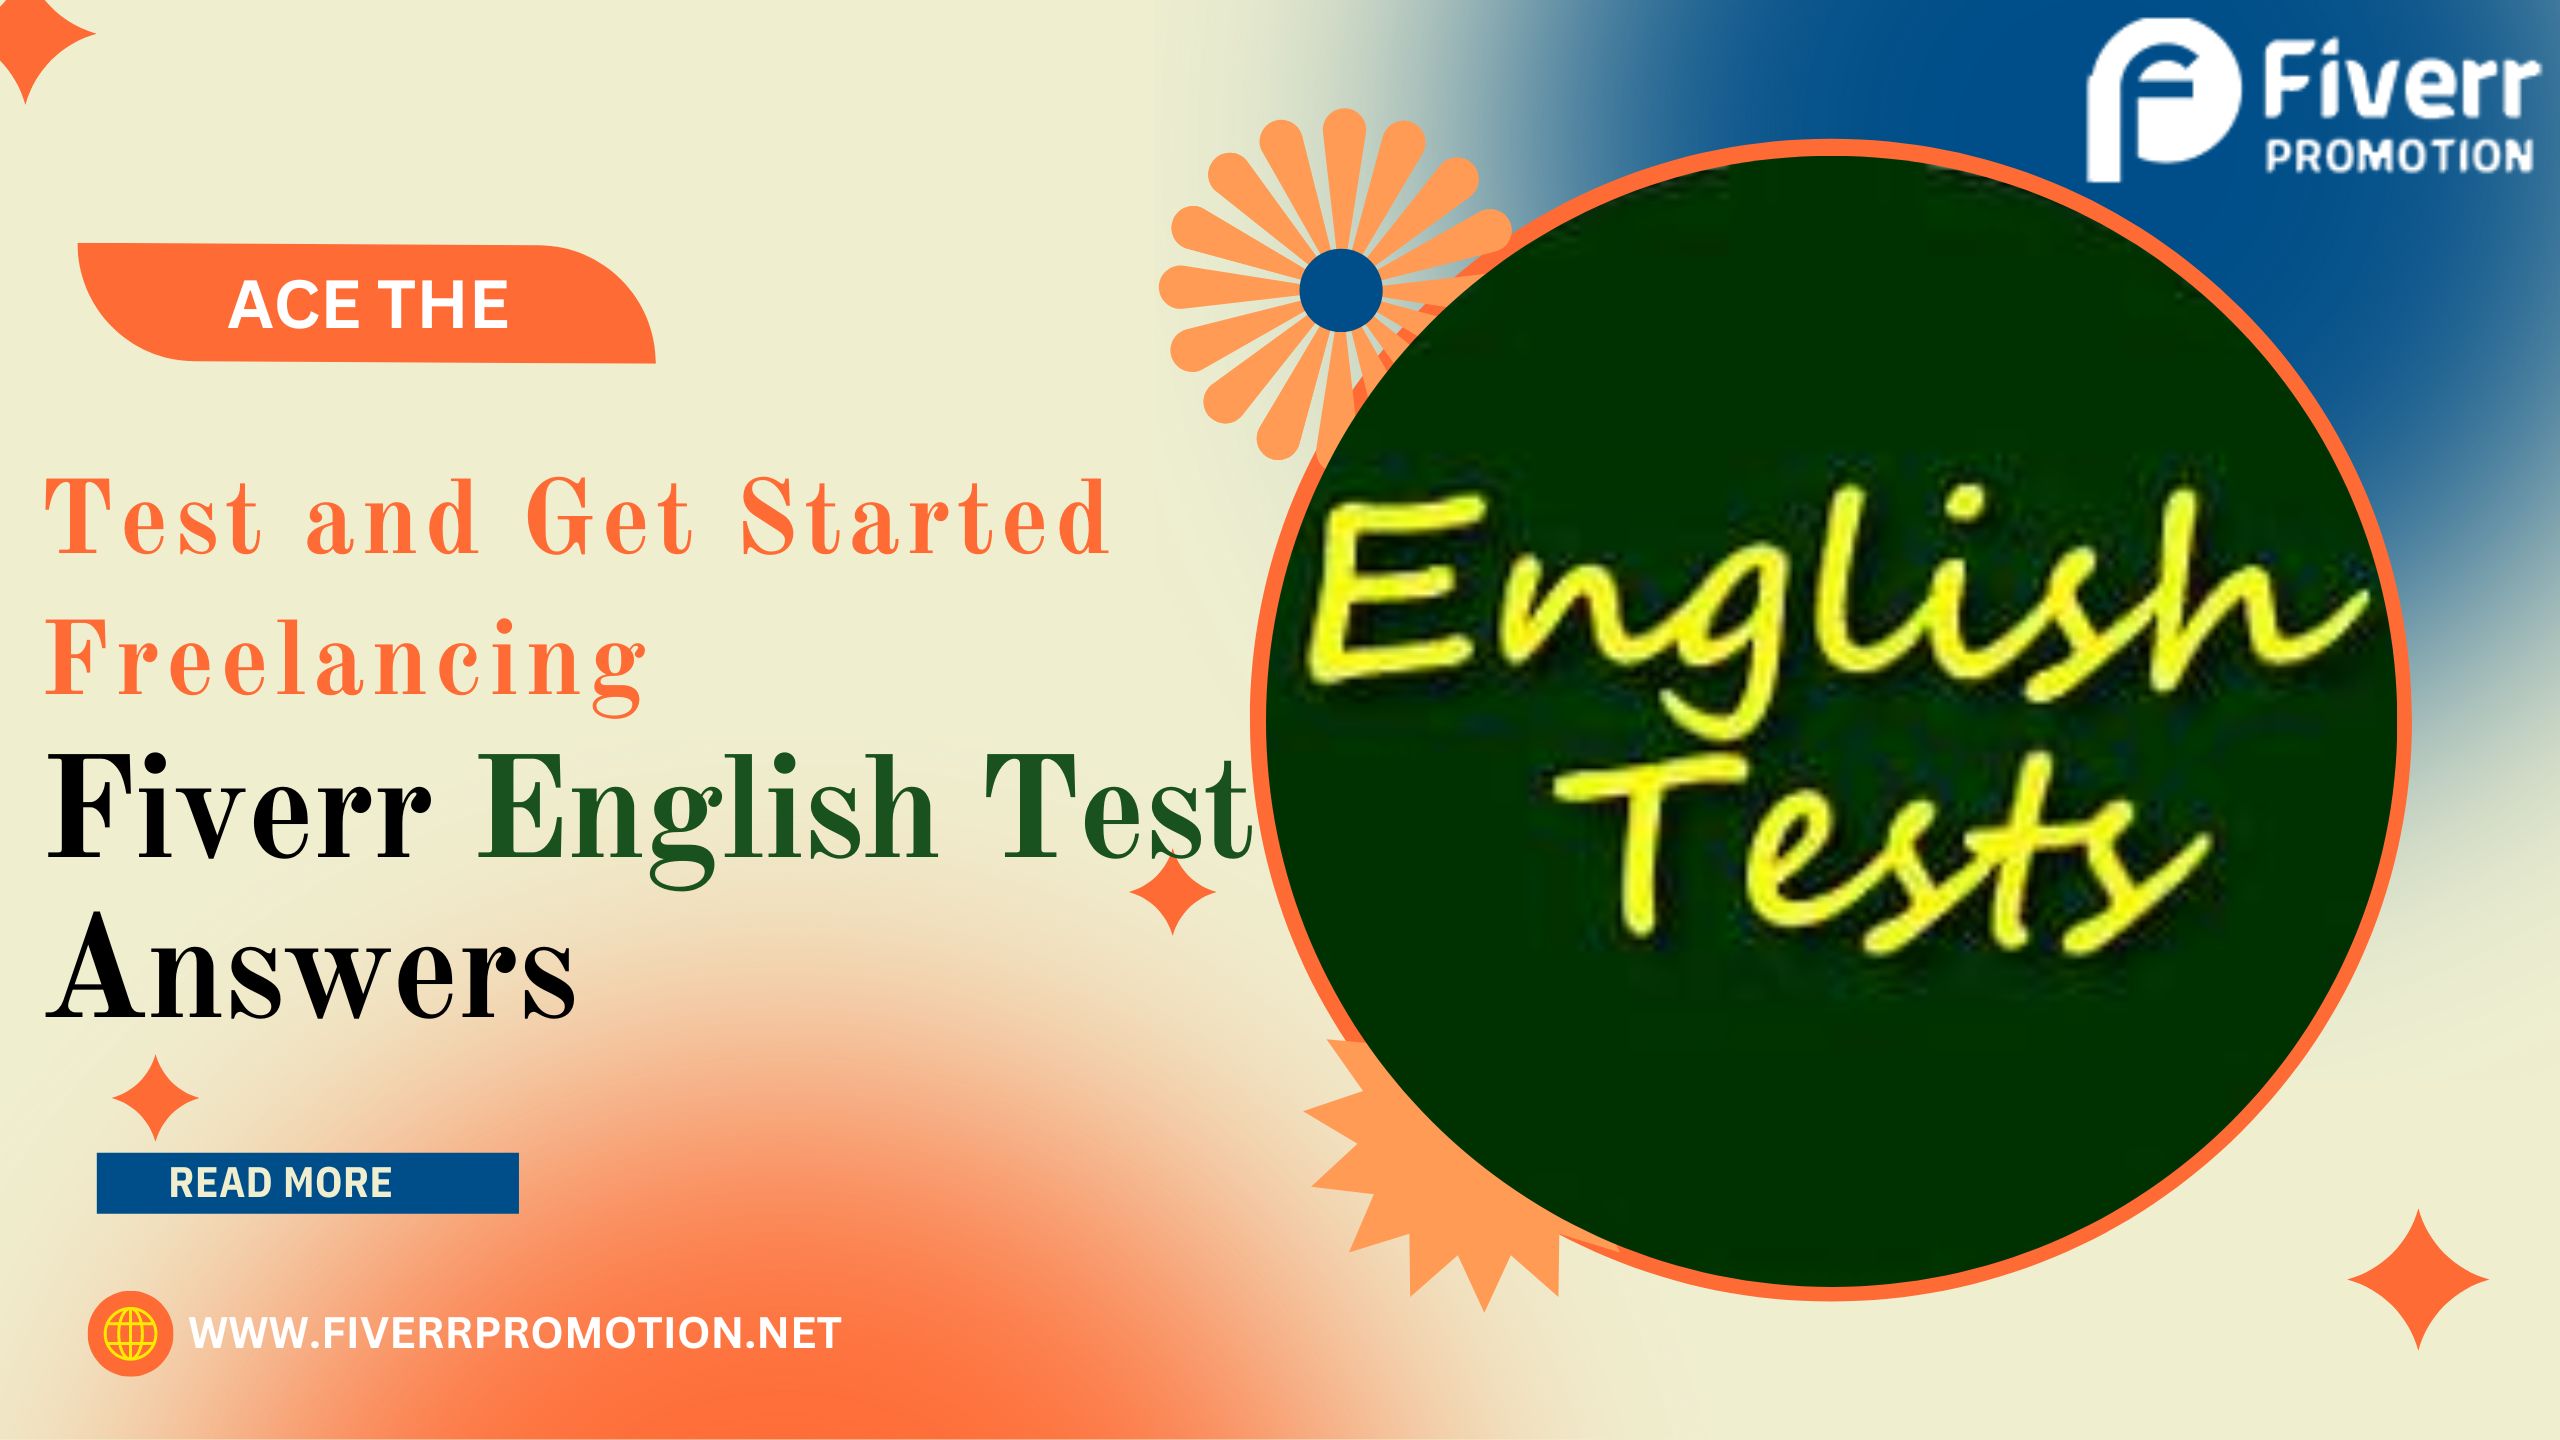 Fiverr English Test Answers 2023: Ace the Test and Get Started Freelancing